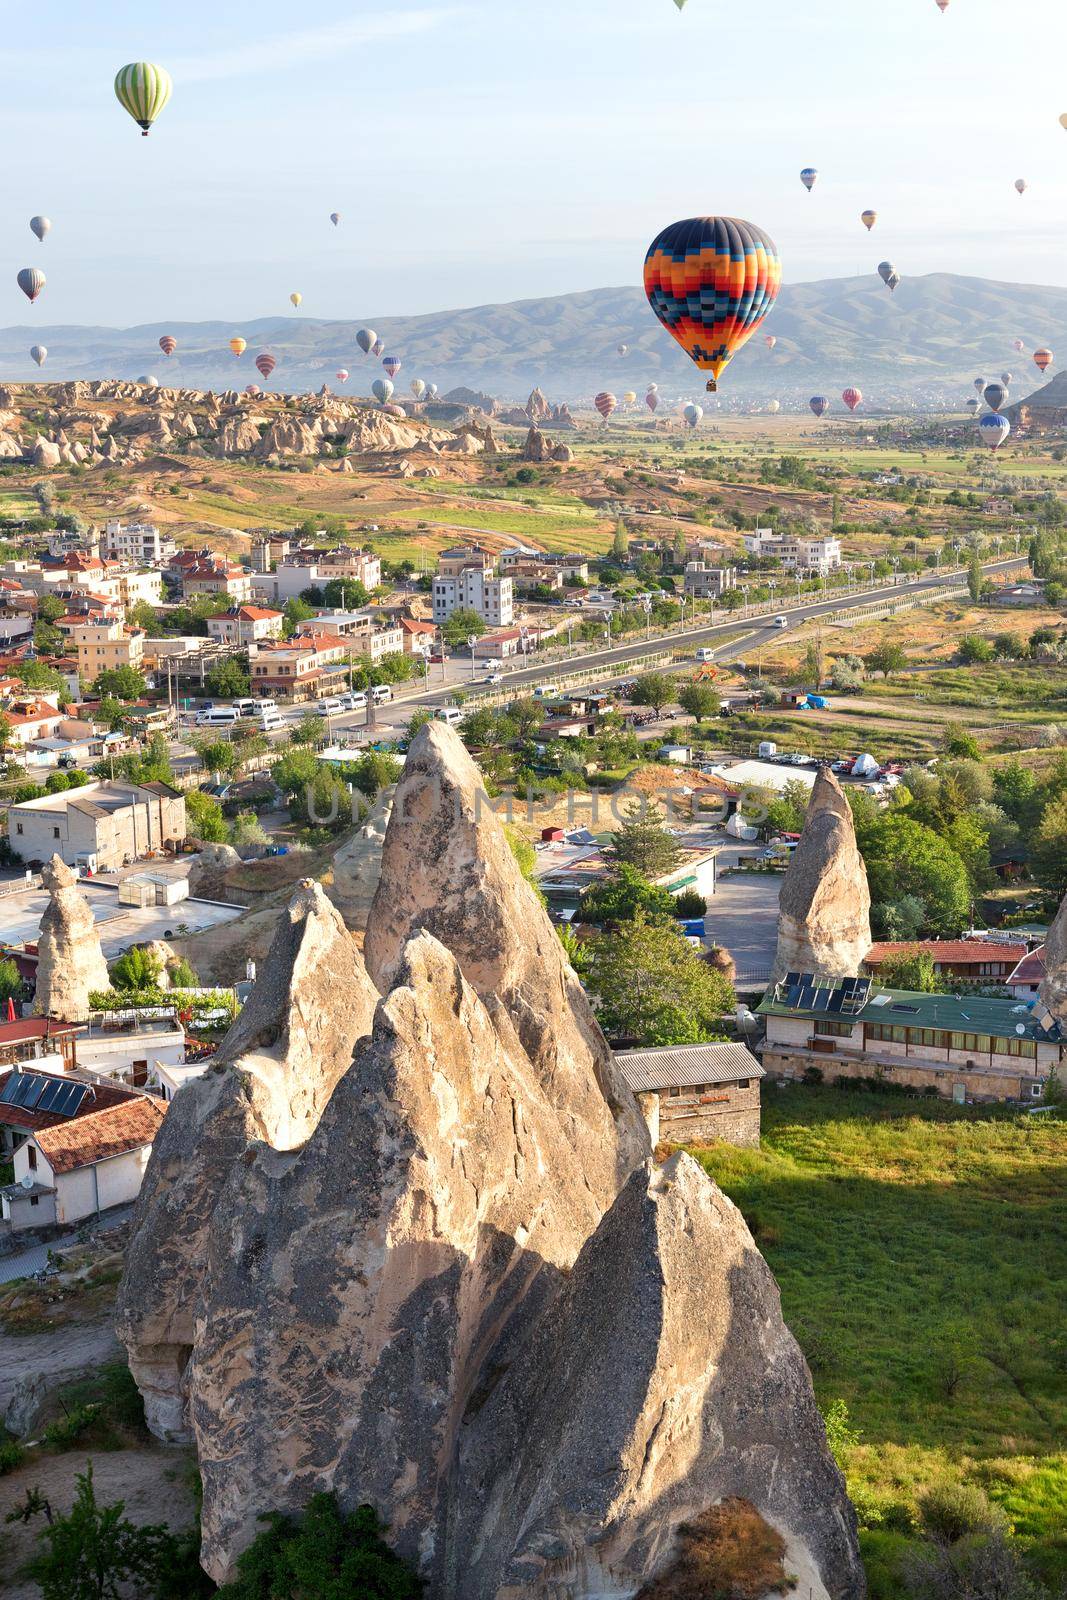 Dozens of balloons fly over the city of Goreme in Turkey and over the valleys of Cappadocia. by Sergii